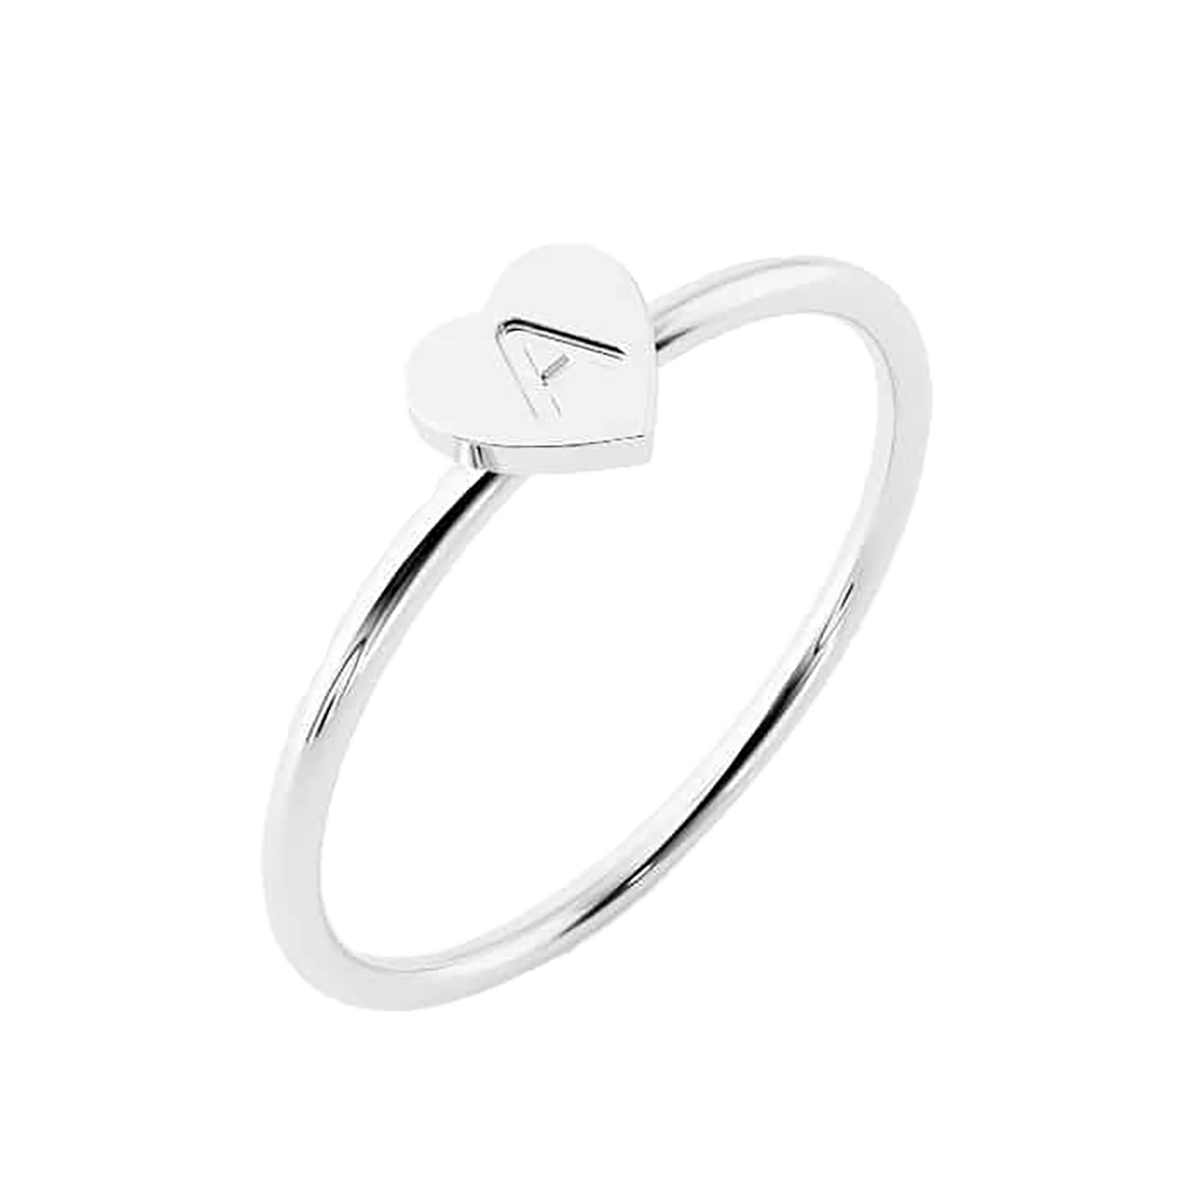 Minimalist Tiny Heart Ring for Women Sterling Silver Dainty Cute